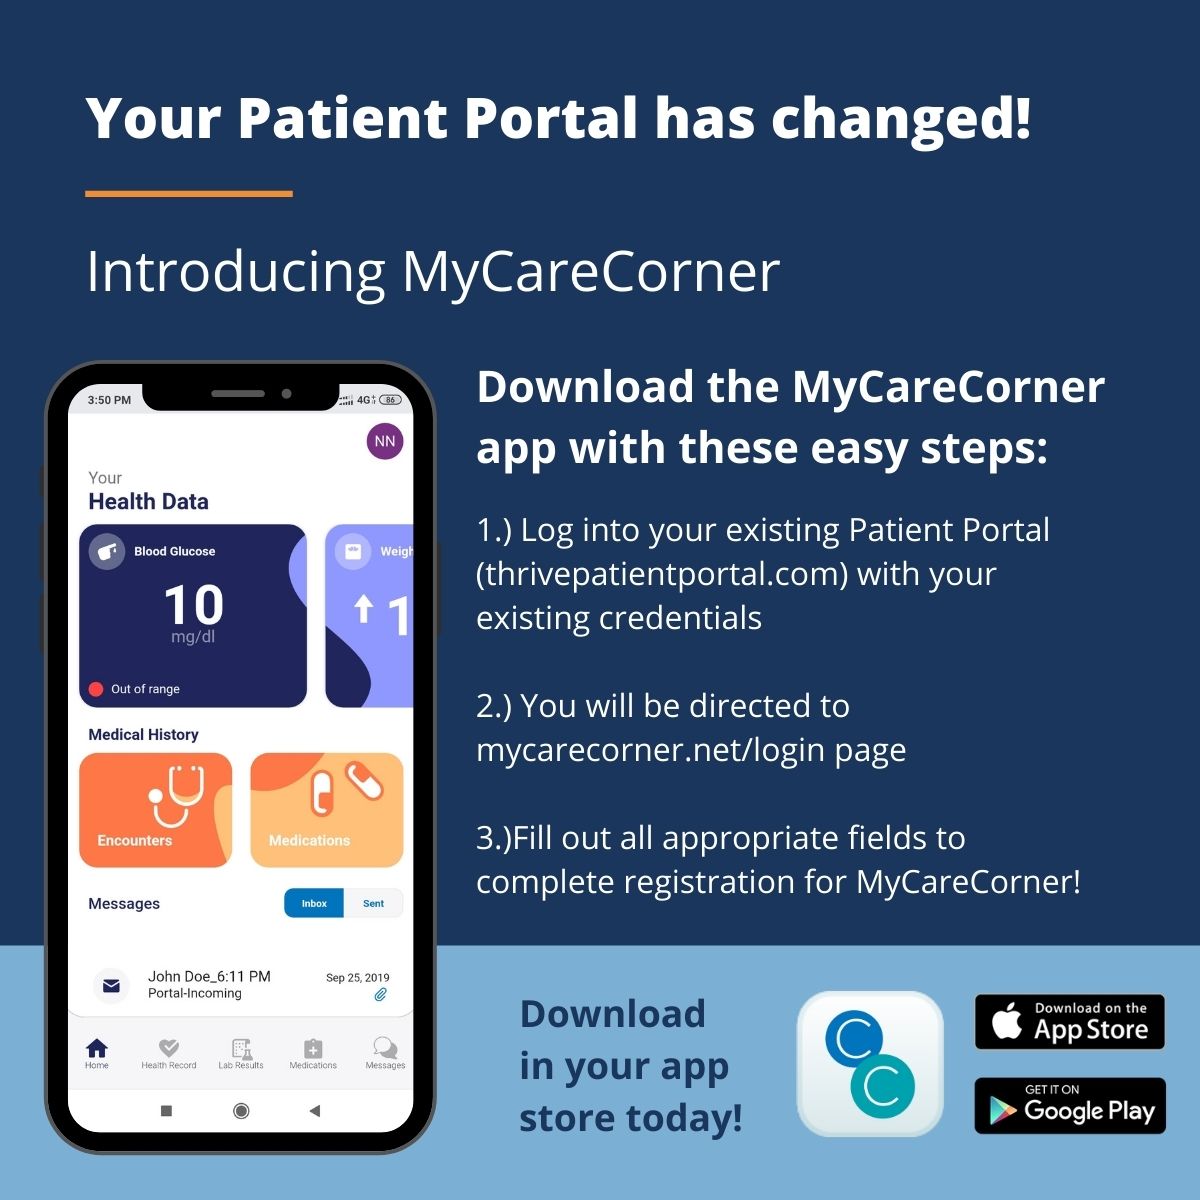 Seneca Healthcare District's Patient Portal is an online tool to help you manage and view your up to date healthcare information in one easy and secure place. Your Patient Portal has transitioned to MyCareCorner! Click here for more information or to find out how to download the MyCareCorner App.